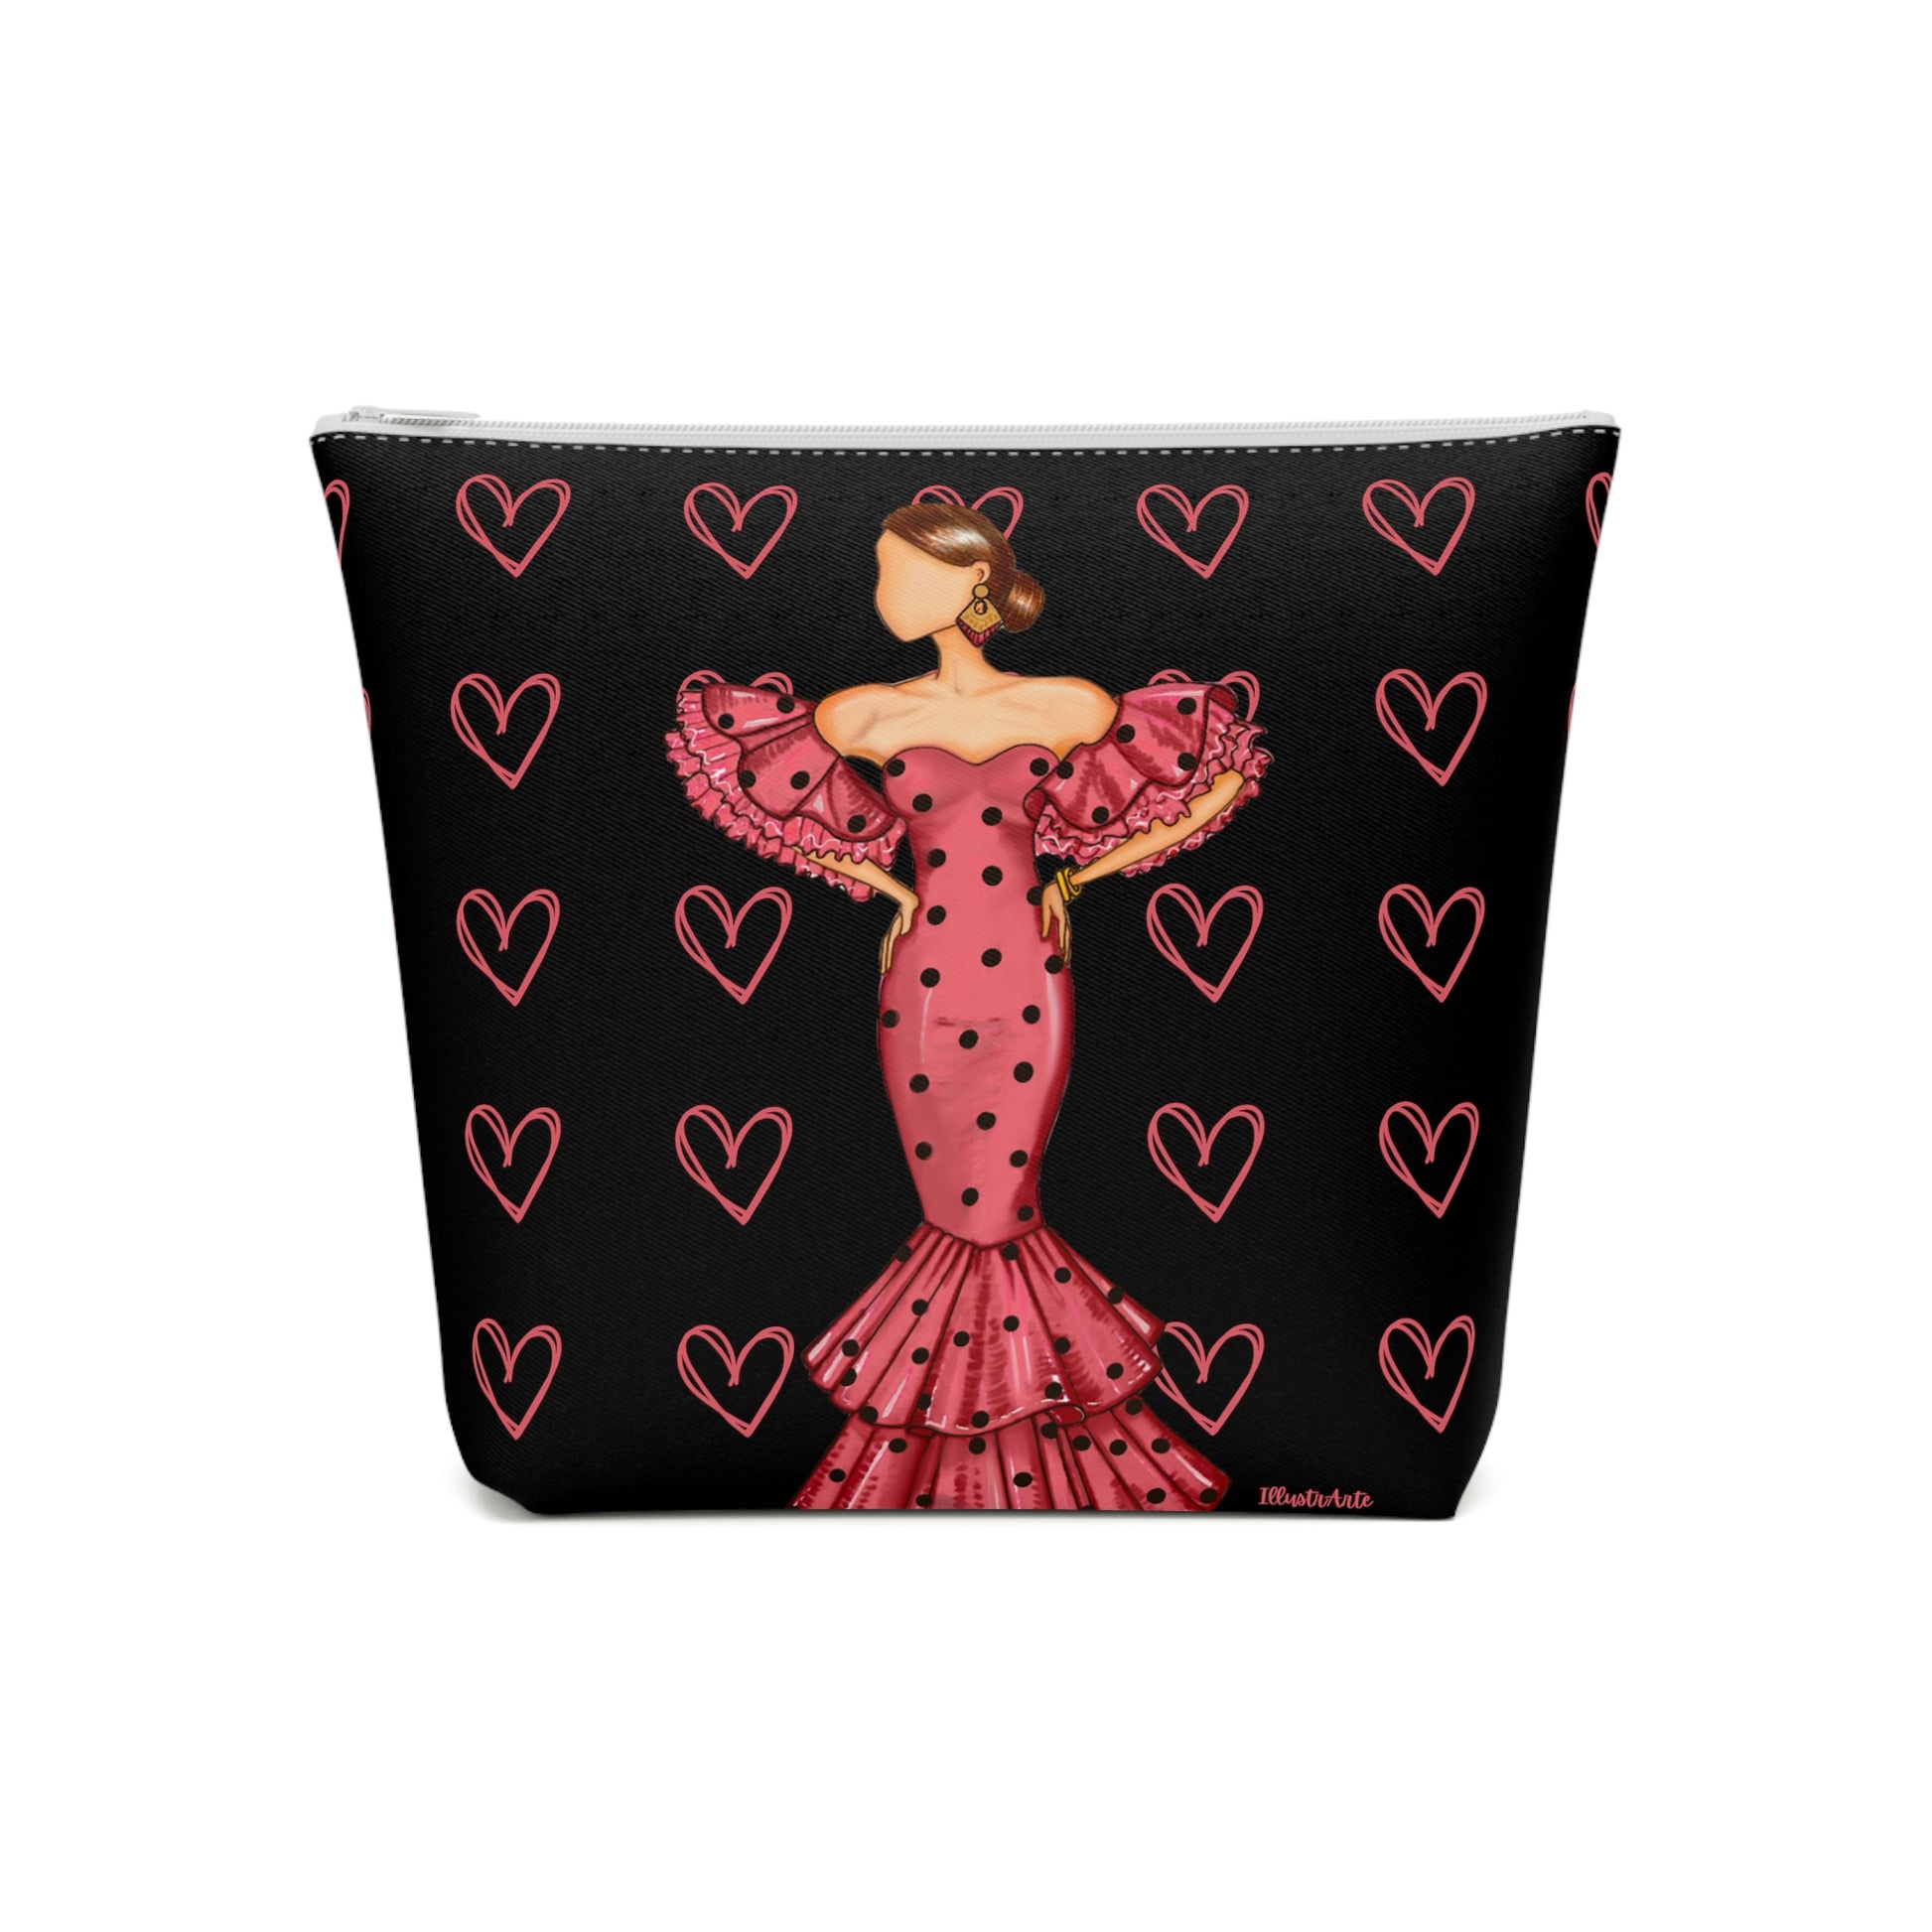 a purse with a woman in a pink dress and hearts on it